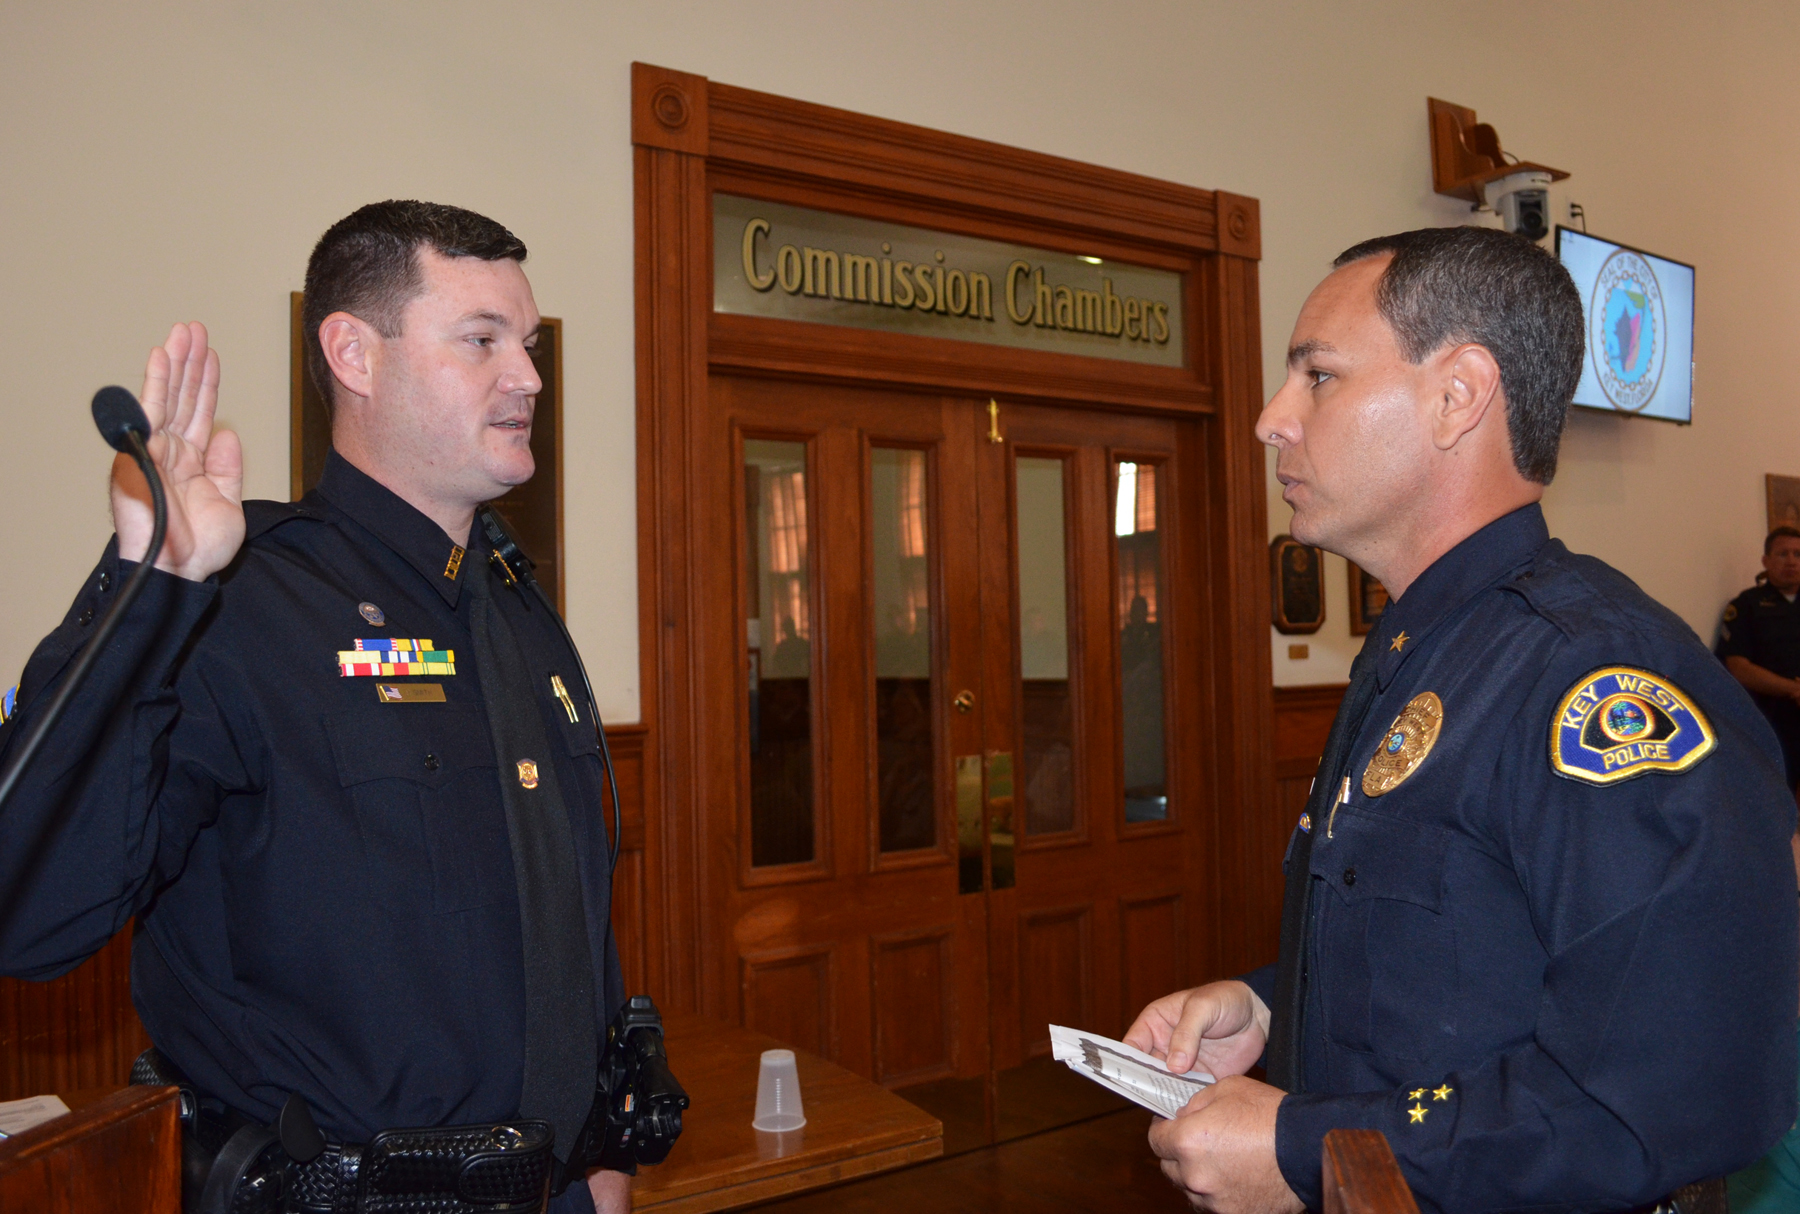 Randall Smith promoted to Sgt. of KWPD